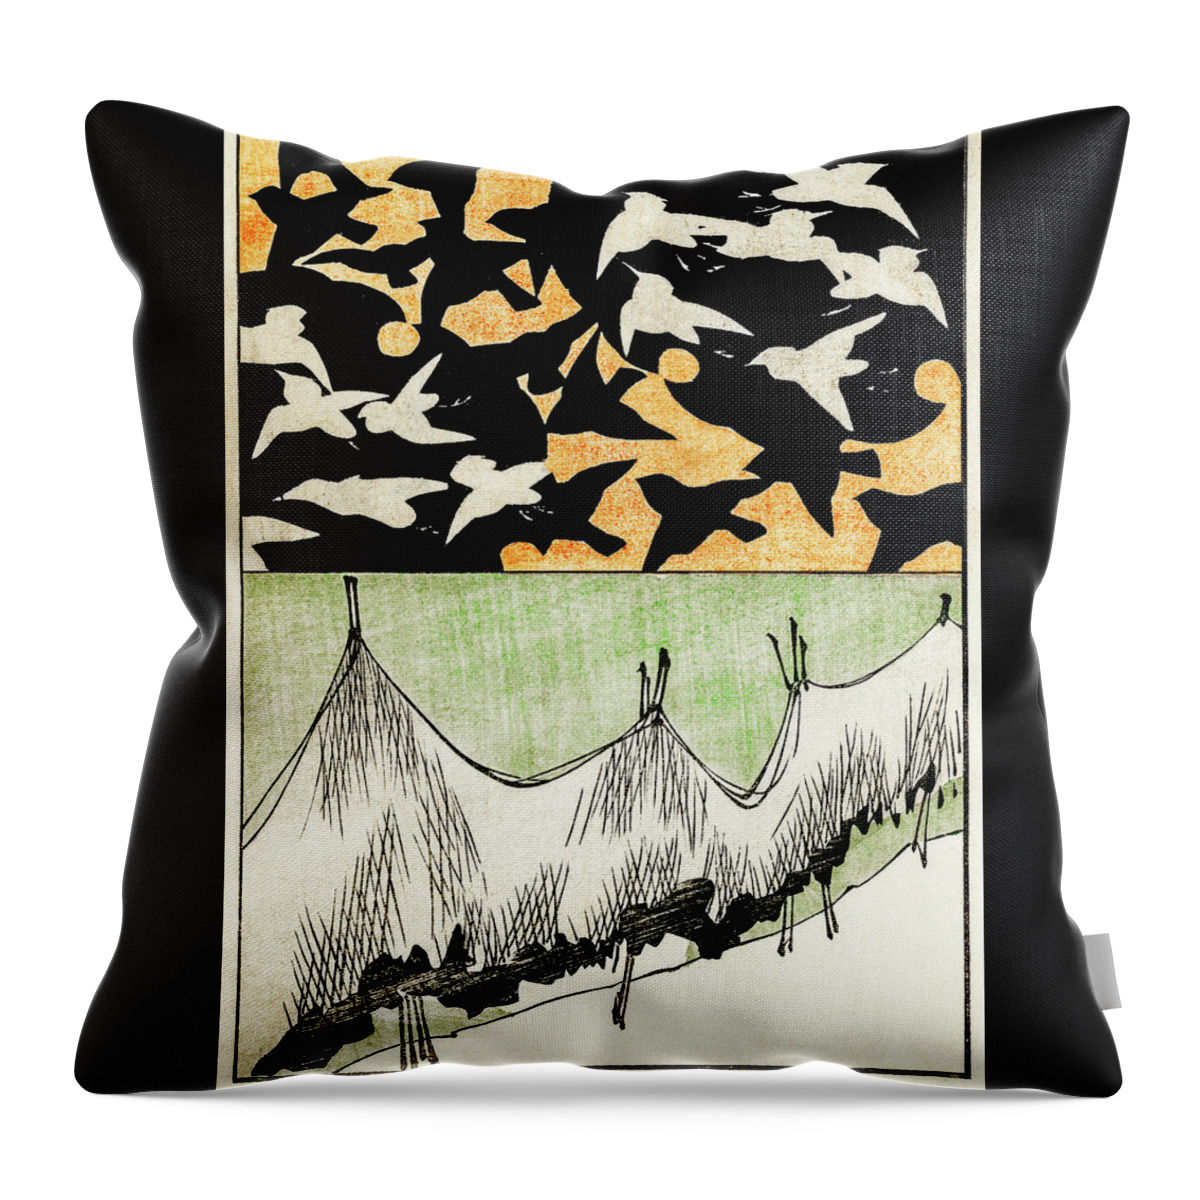 Watanabe Seitei Throw Pillow featuring the painting Birds and Net - Japanese traditional pattern design by Watanabe Seitei